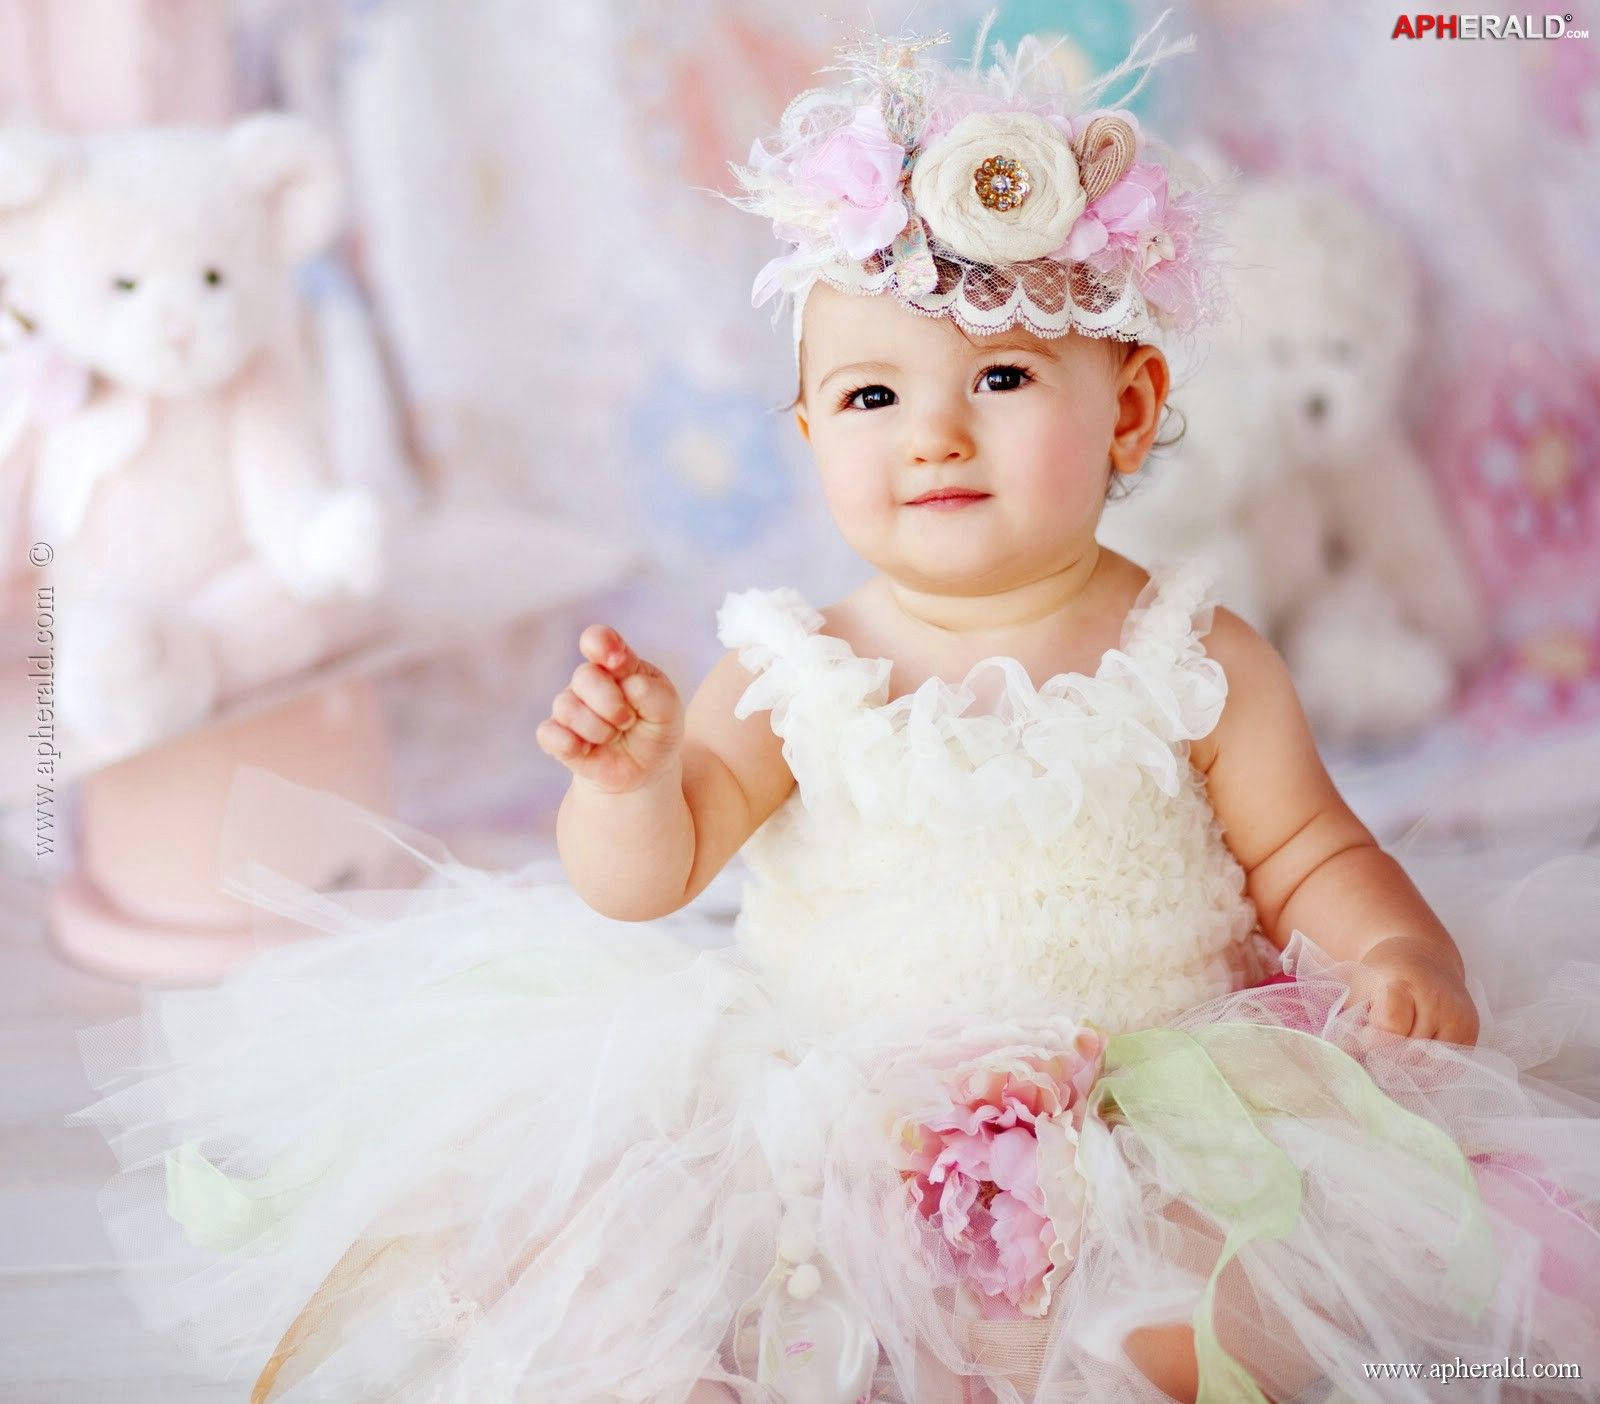 Baby In Floral Gown Wallpaper